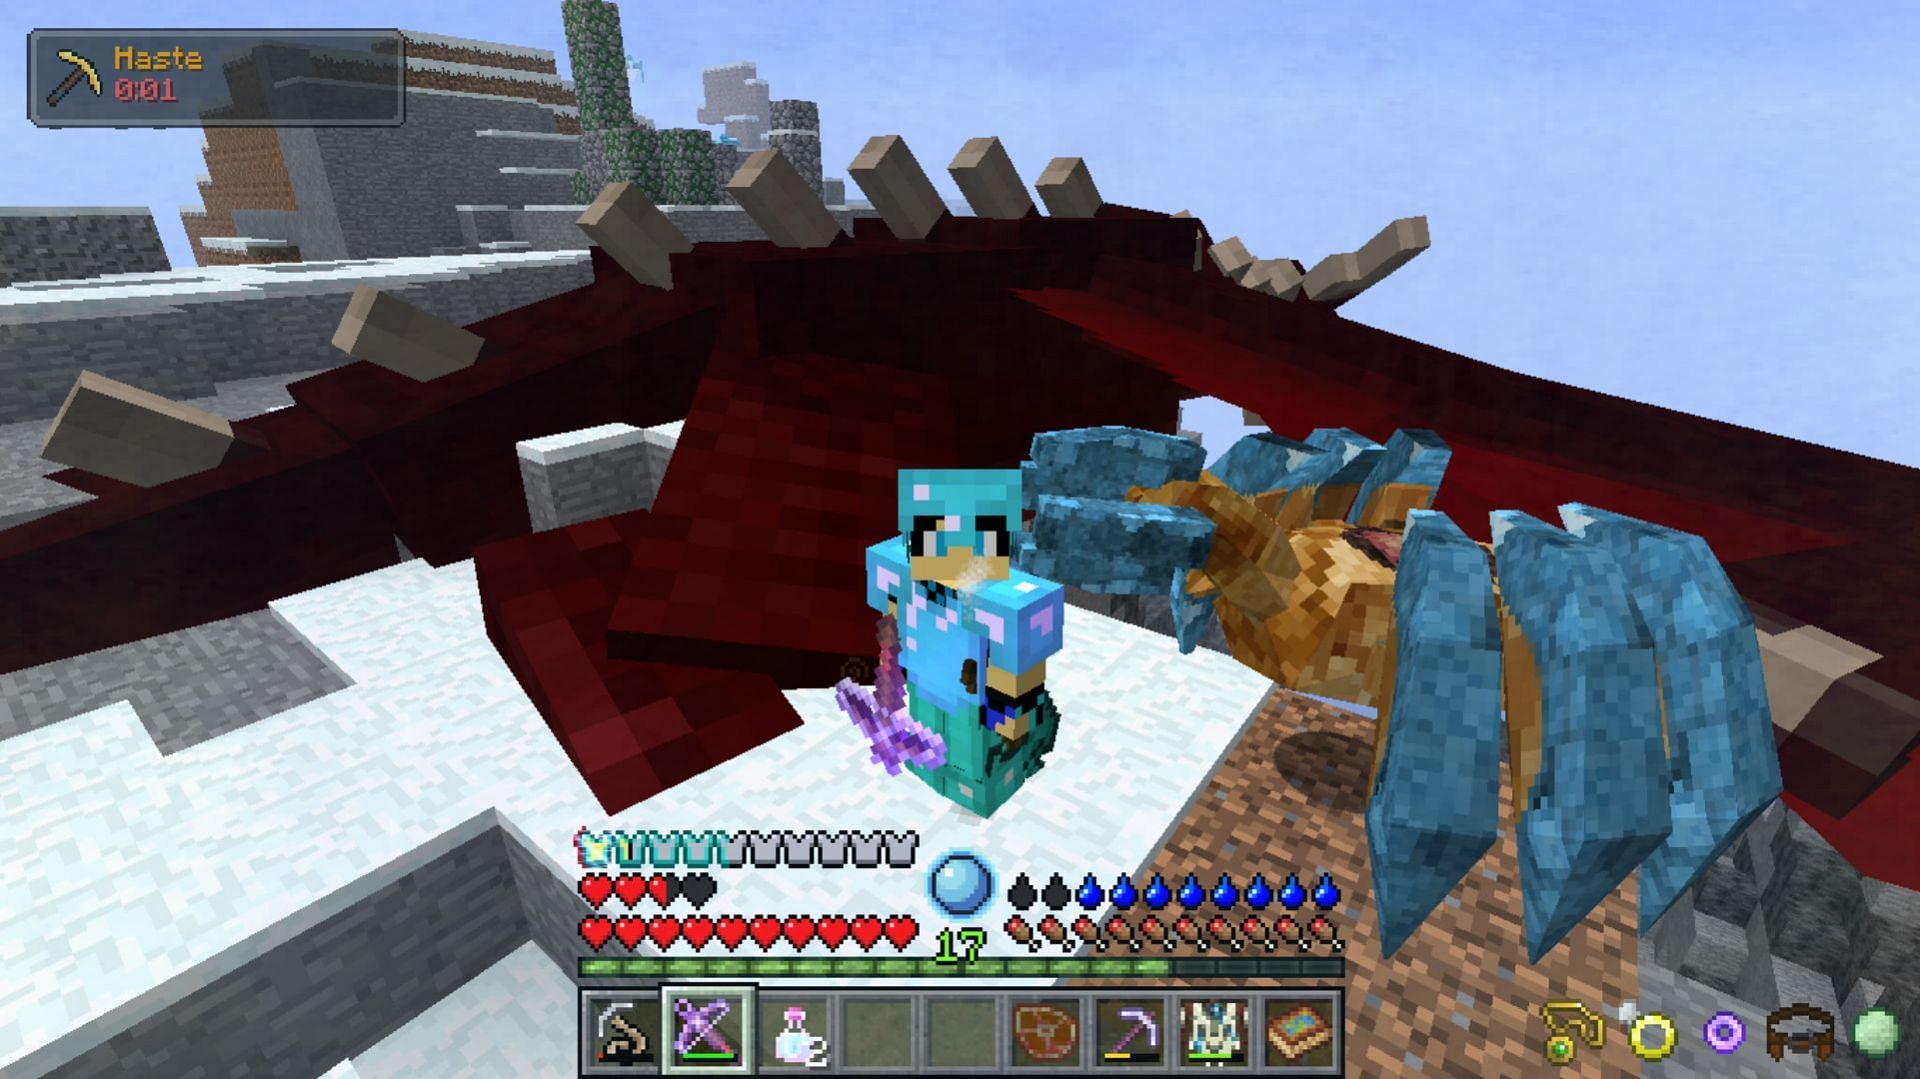 Players will also fight new kinds of dragons in this Minecraft modpack (Image via u/TeeJayBex/Reddit)